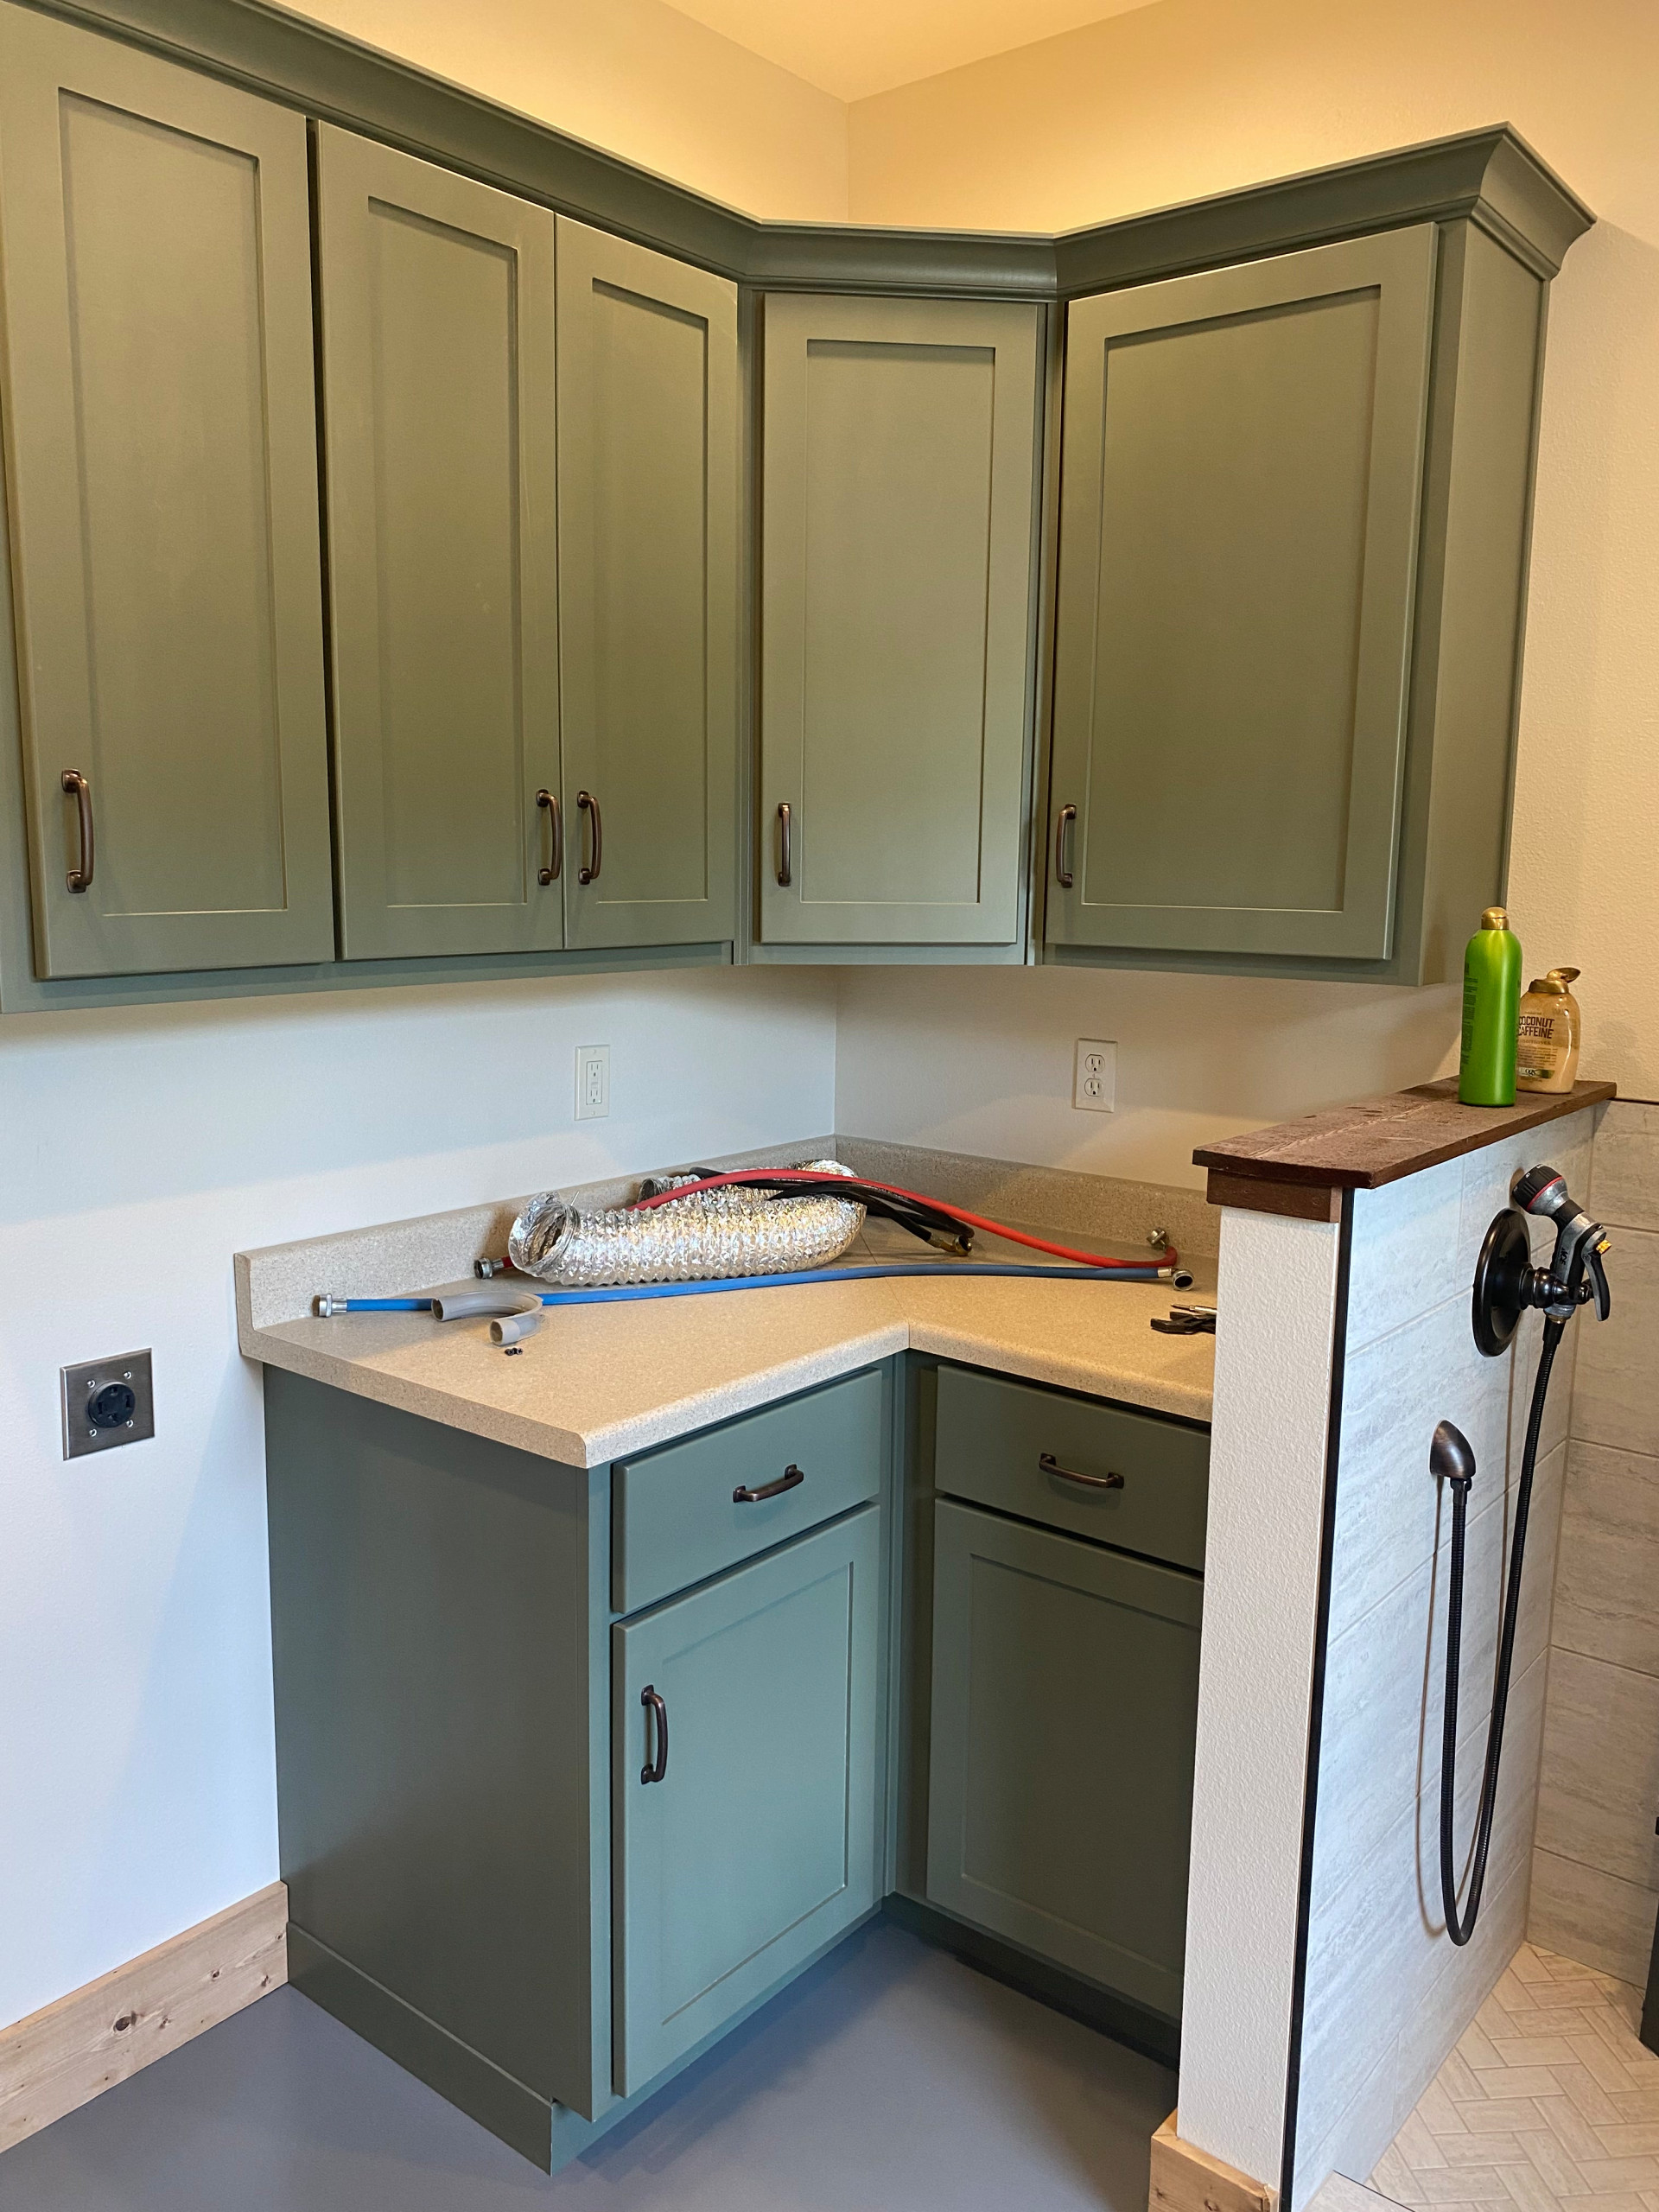 Custom painted laundry room cabinets and tiled dog wash